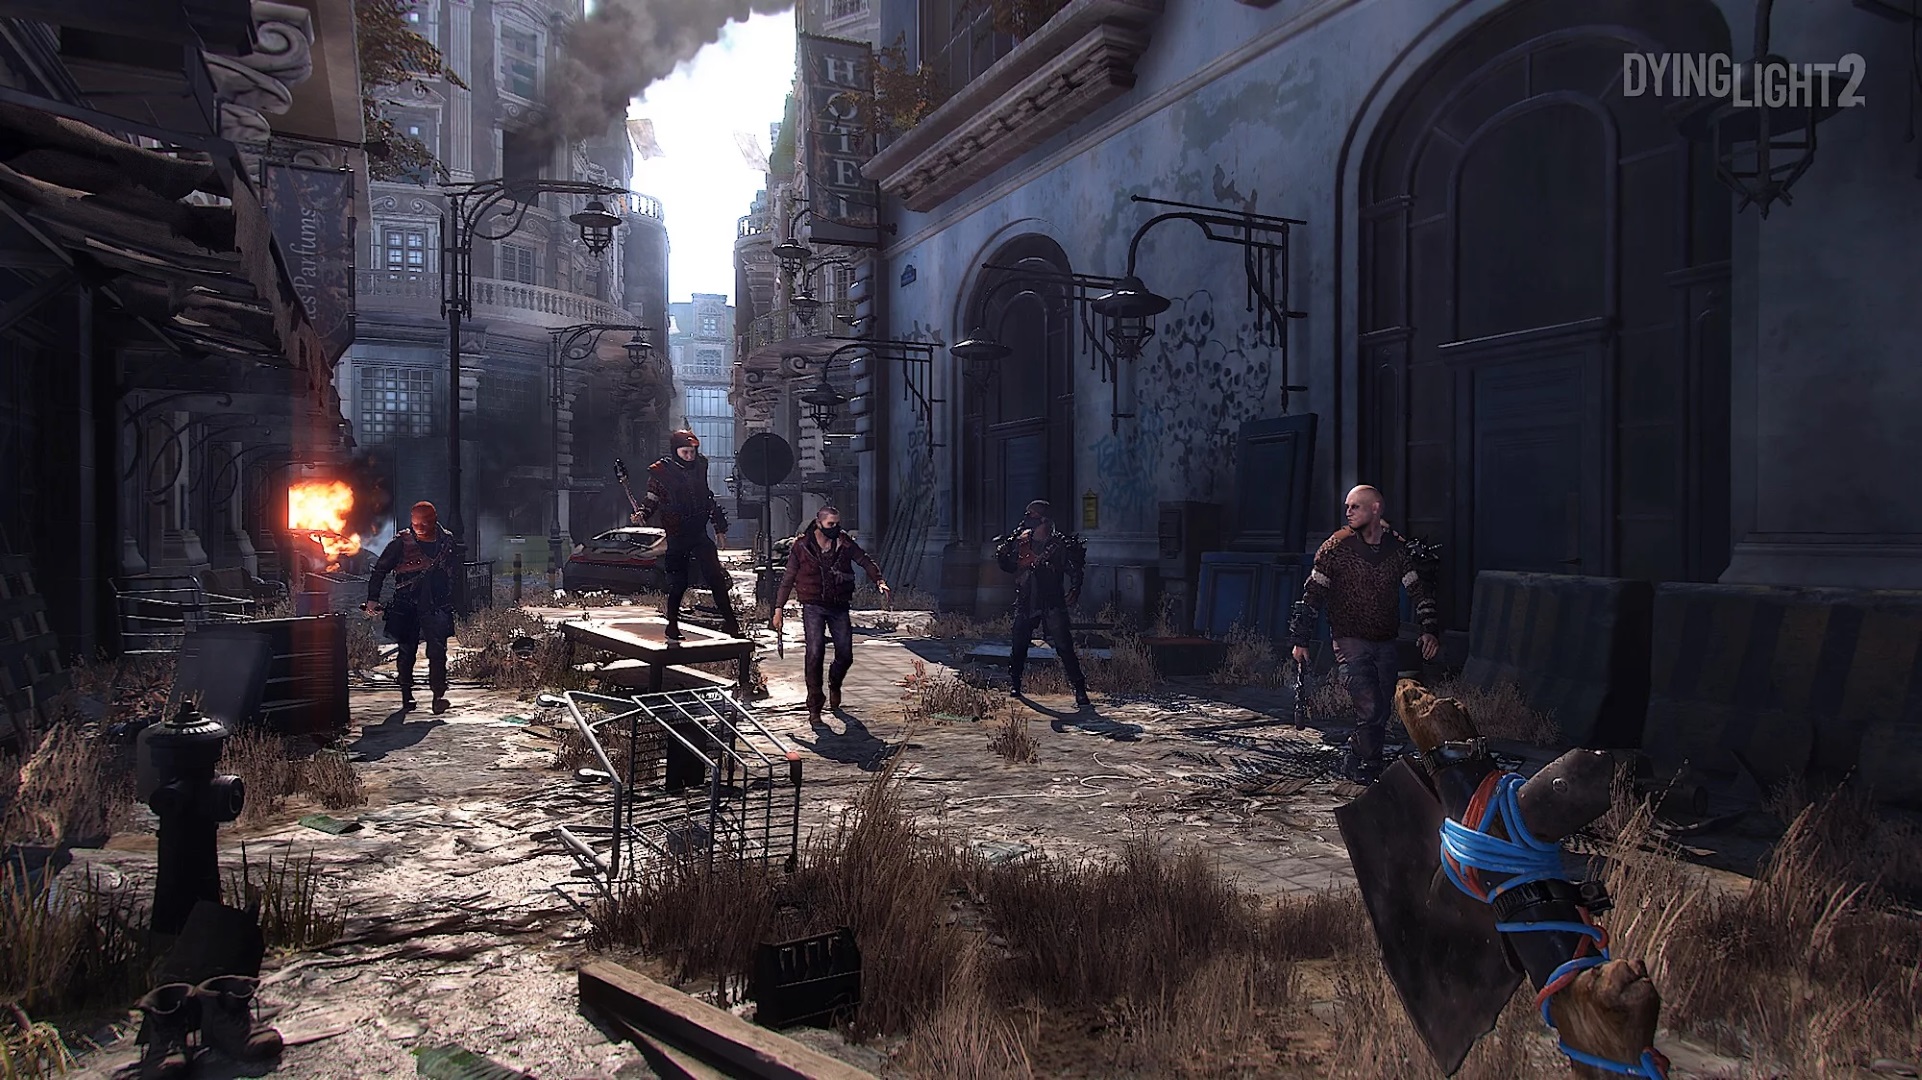 Dying Light 2 release date, release time, and all the details